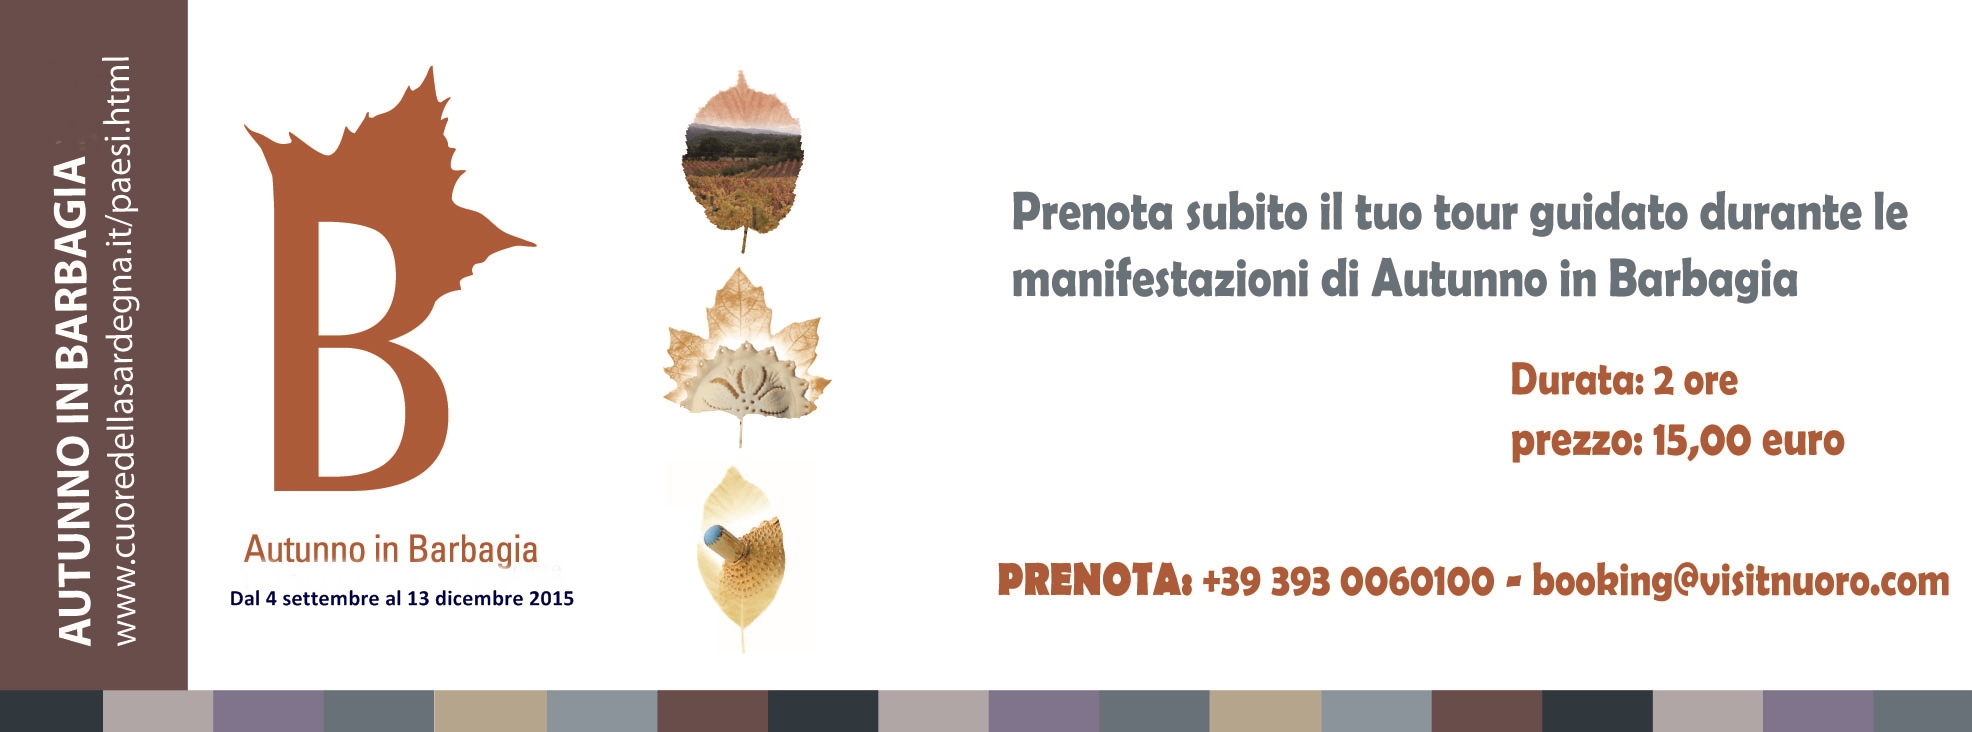 autunno in barbagia 2015 def